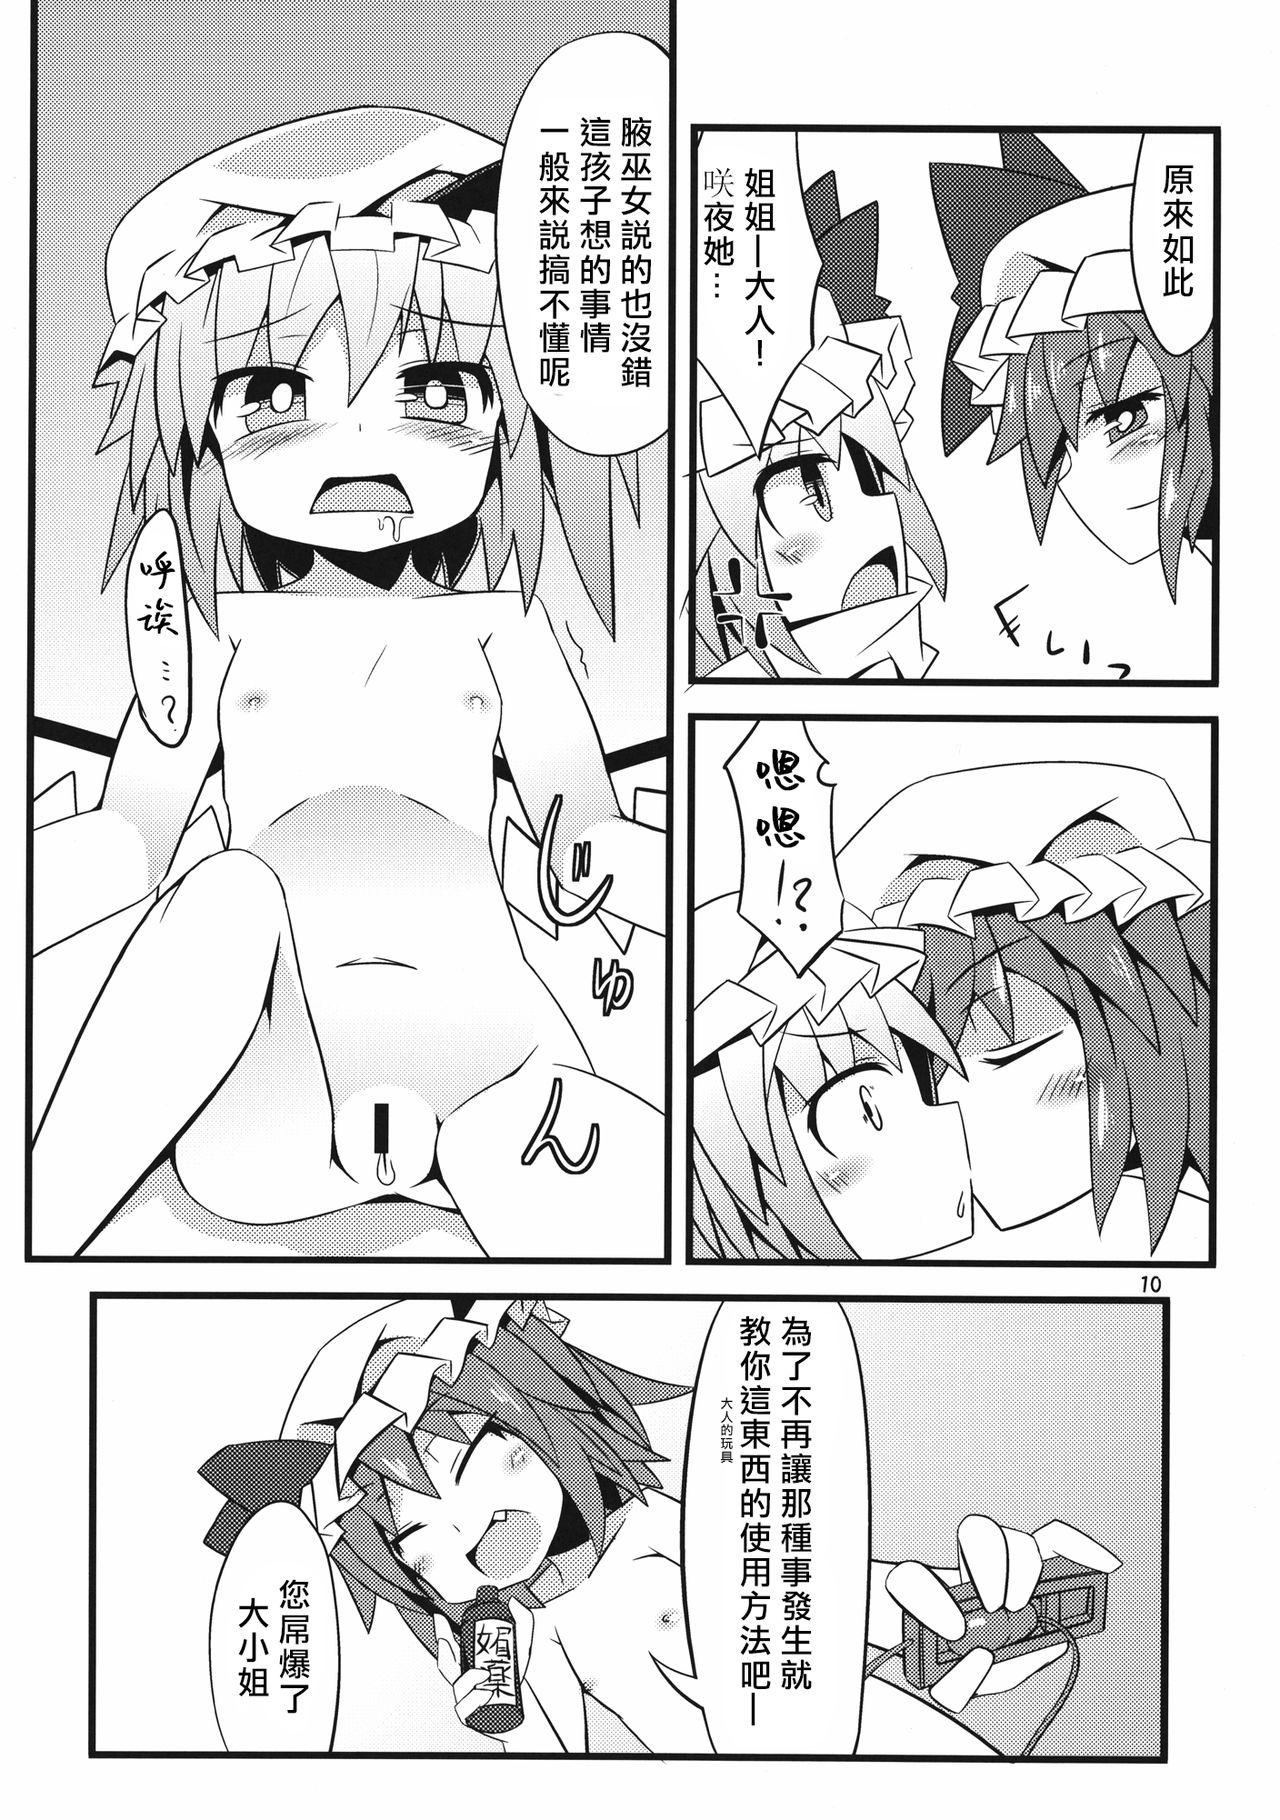 Babes Flan-chan to Asobo!! - Touhou project Her - Page 10